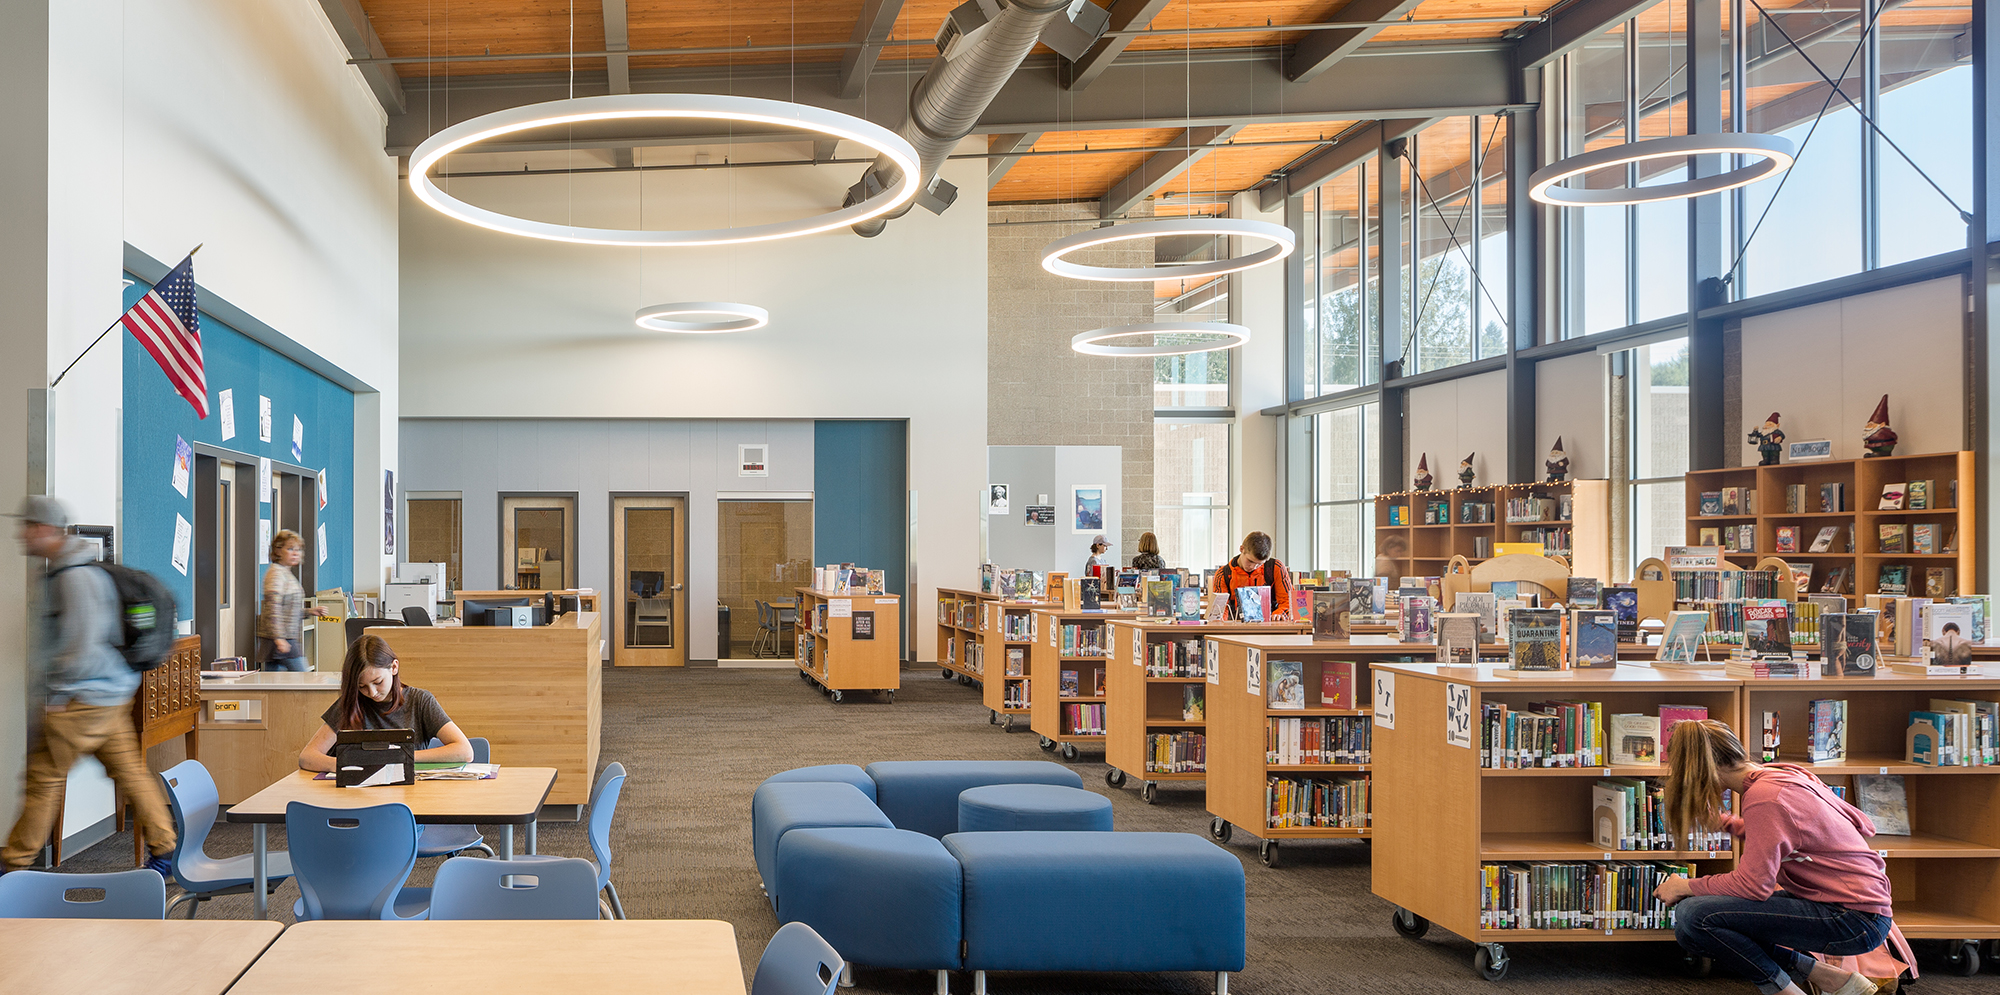 Children inside library at Hockinson Middle School